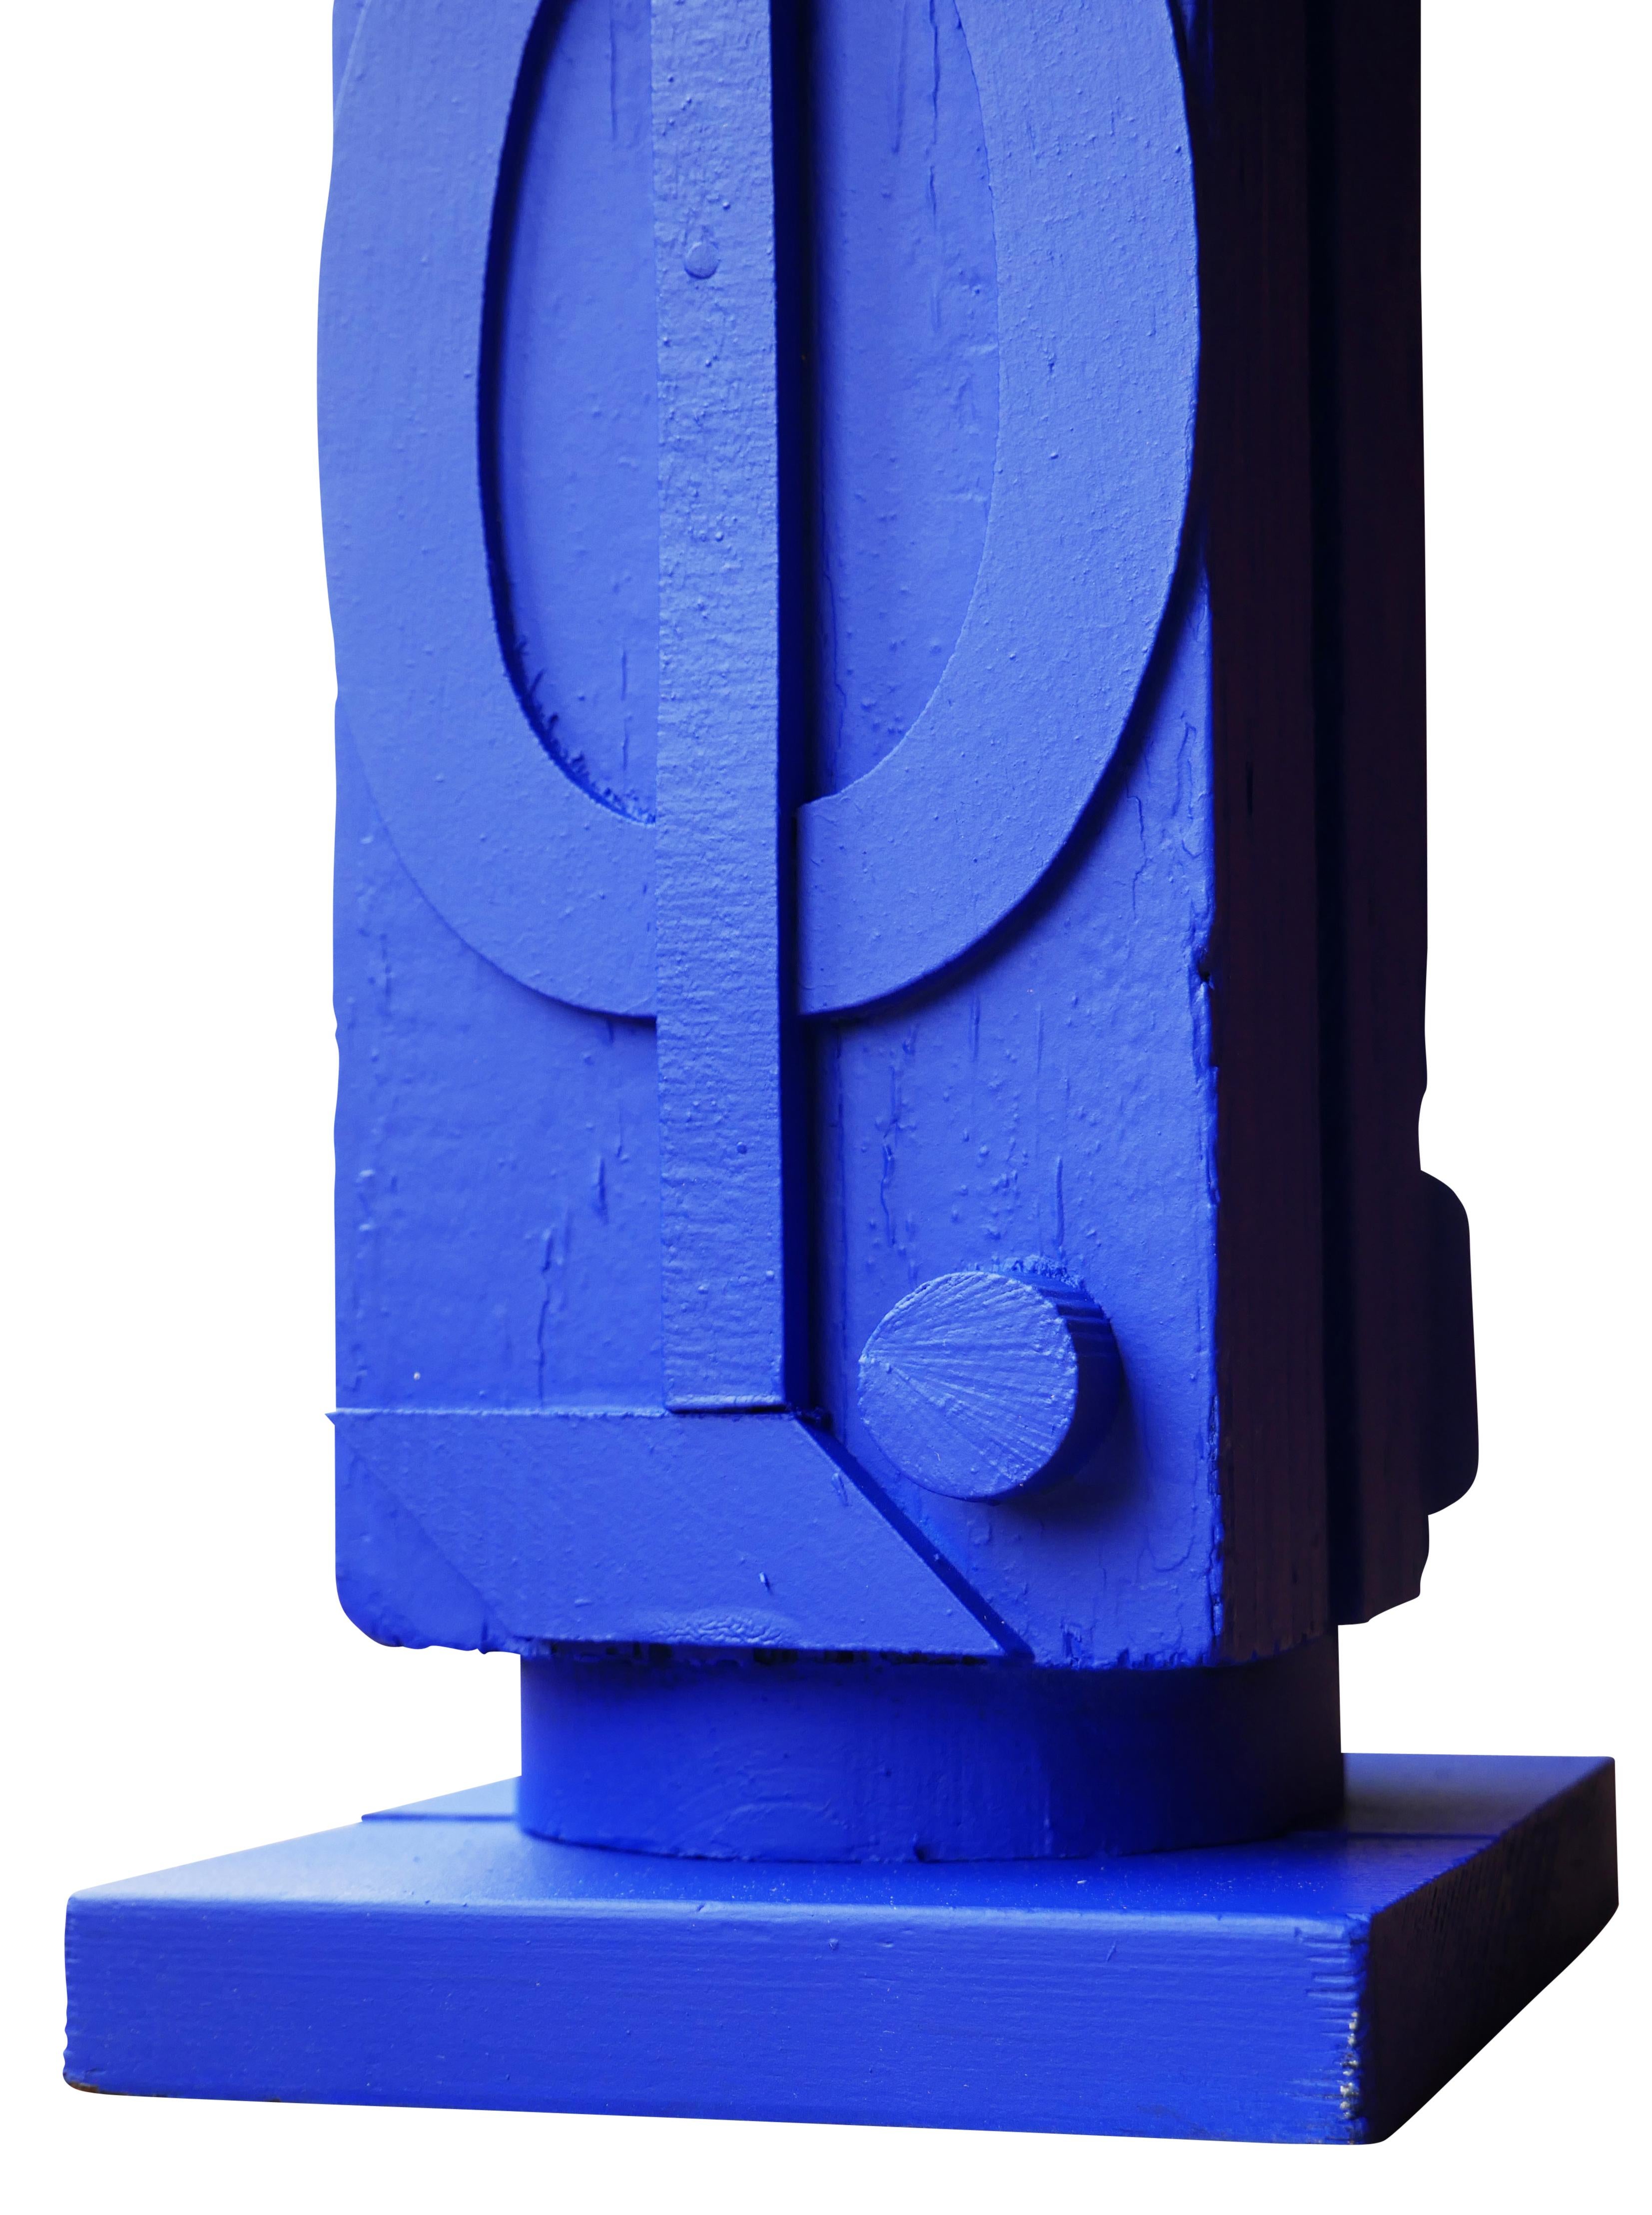 Bright Blue Geometric Abstract Freestanding Contemporary Sculpture For Sale 3